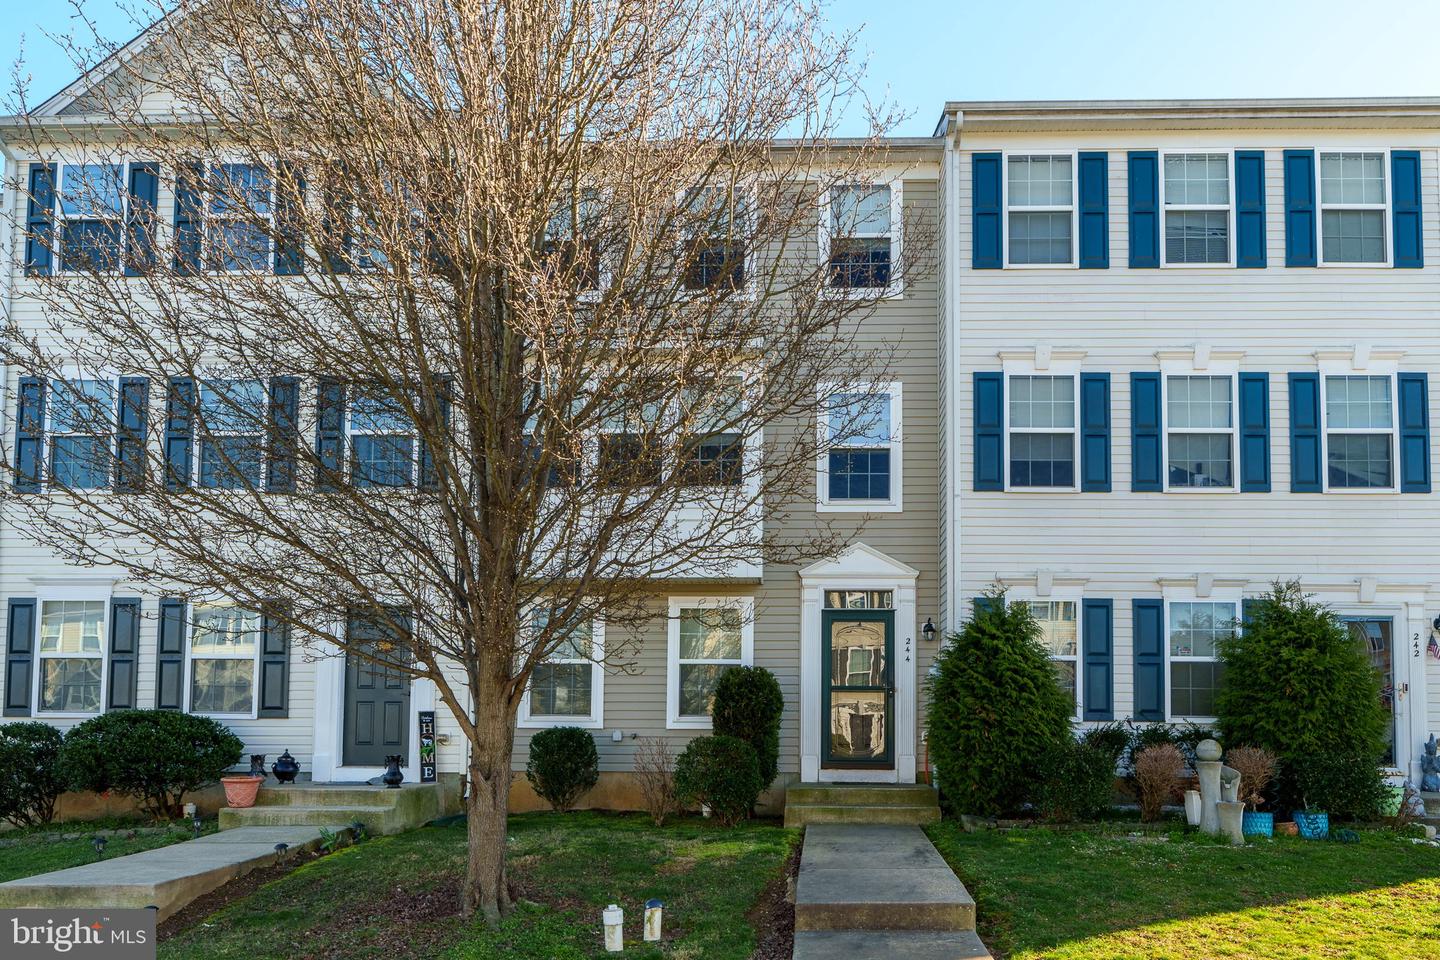 View Lancaster, PA 17603 townhome